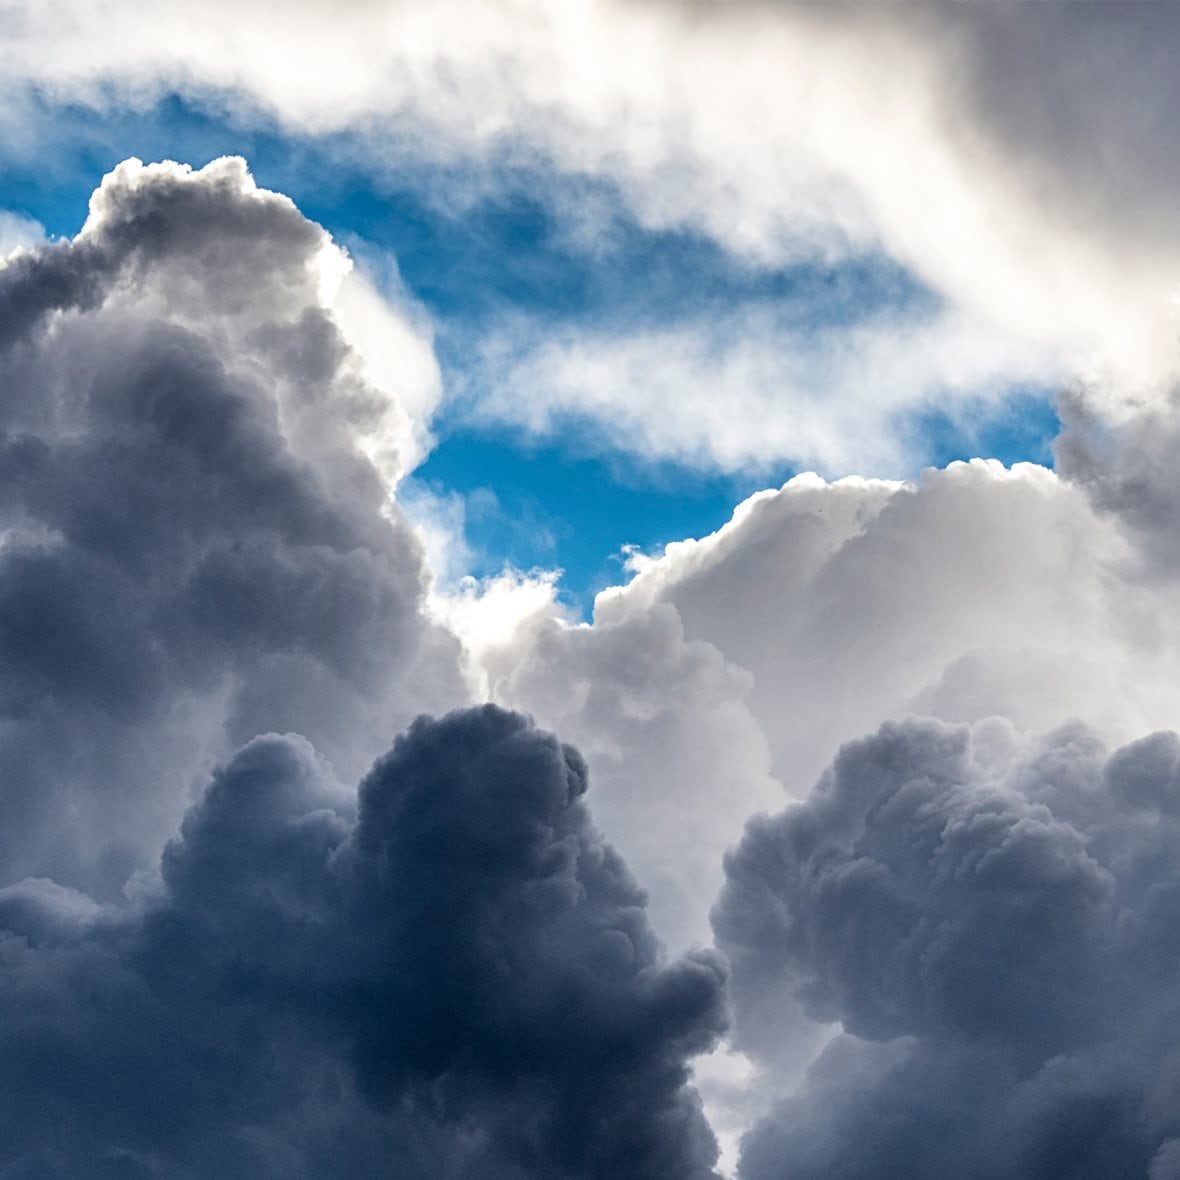 Sunny blue sky with large storm clouds in spring. - stock photo